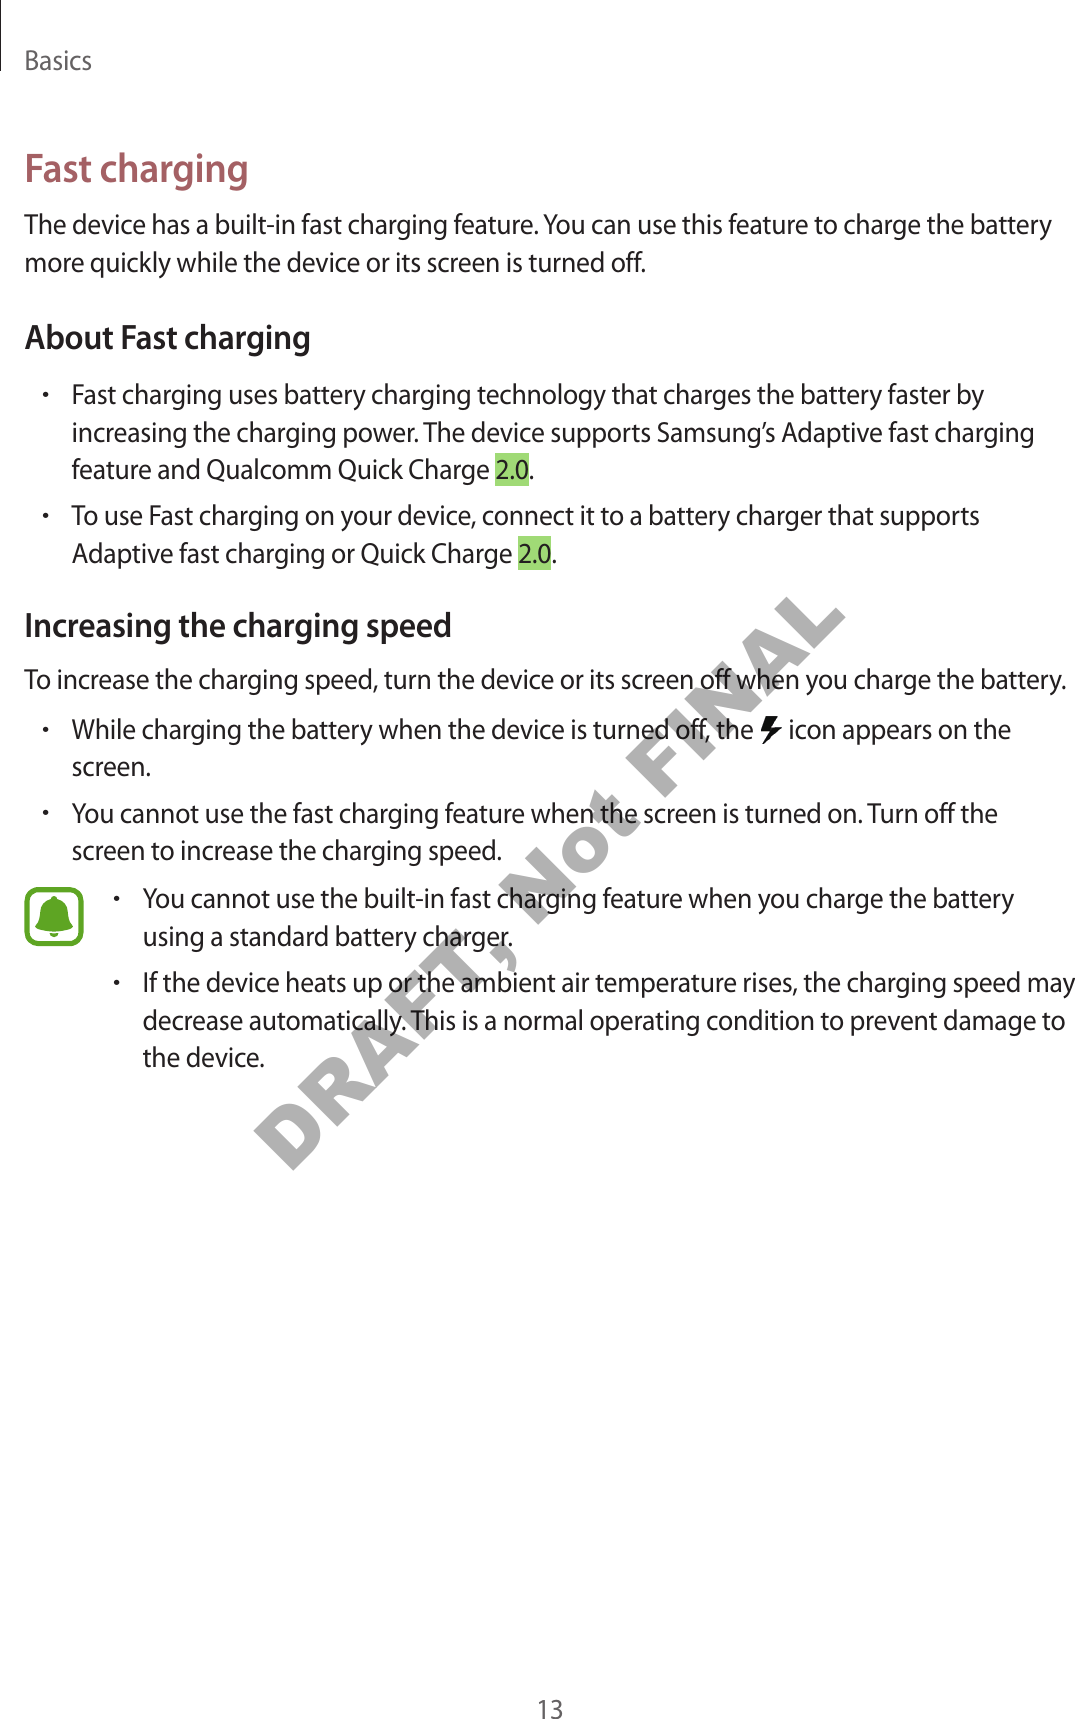 Basics13Fast chargingThe device has a built -in fast charg ing f ea tur e . You can use this featur e to char ge the batt ery more quickly while the device or its screen is turned off.About Fast charging•Fast charg ing uses batt ery charging technology that charges the ba ttery faster by increasing the char ging po w er. The device supports Samsung ’s Adaptiv e fast char ging featur e and Qualc omm Quick Charge 2.0.•To use Fast charg ing on y our device, connect it to a batt ery charger that supports Adaptiv e fast char ging or Quick Char ge 2.0.Increasing the charg ing speedTo increase the char ging speed , turn the device or its scr een off when y ou char ge the ba ttery.•While charg ing the batt ery when the device is turned off , the   icon appears on the screen.•You cannot use the fast charging fea tur e when the scr een is turned on. Turn off the screen to incr ease the char g ing speed .•You cannot use the built-in fast charging f eatur e when y ou char ge the batt ery using a standard batt ery charger.•If the device heats up or the ambient air tempera tur e rises, the char g ing speed ma y decrease automa tically. T his is a normal operating c ondition to pr ev en t damage to the device .DRAFT, Not FINAL